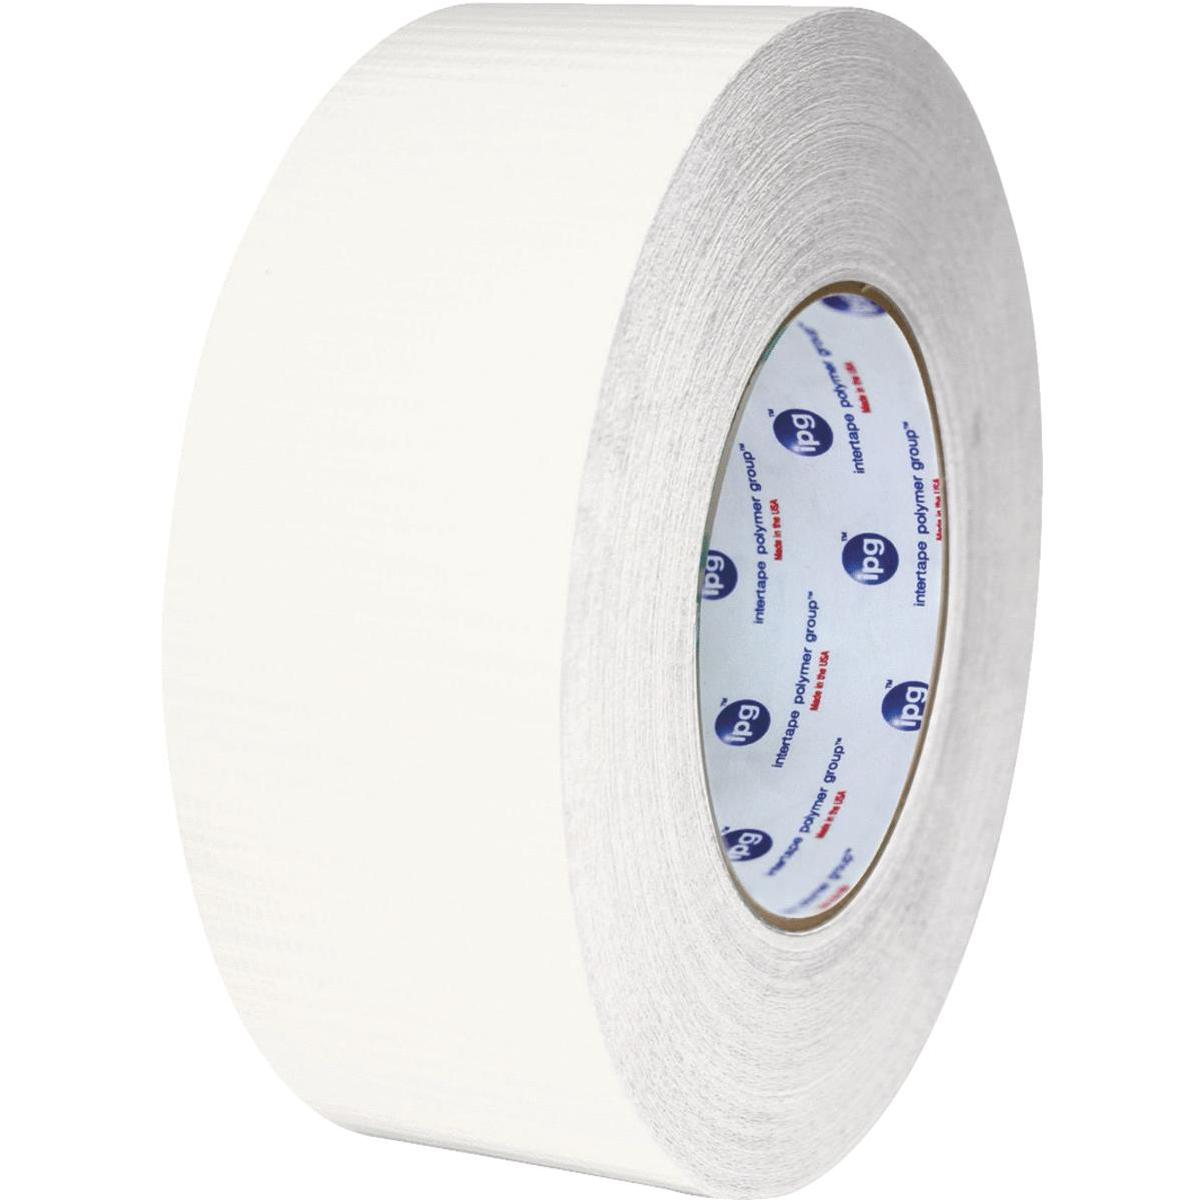 Gorilla Tape, White Duct Tape, 1.88 x 10 yd, White, (Pack of 6)